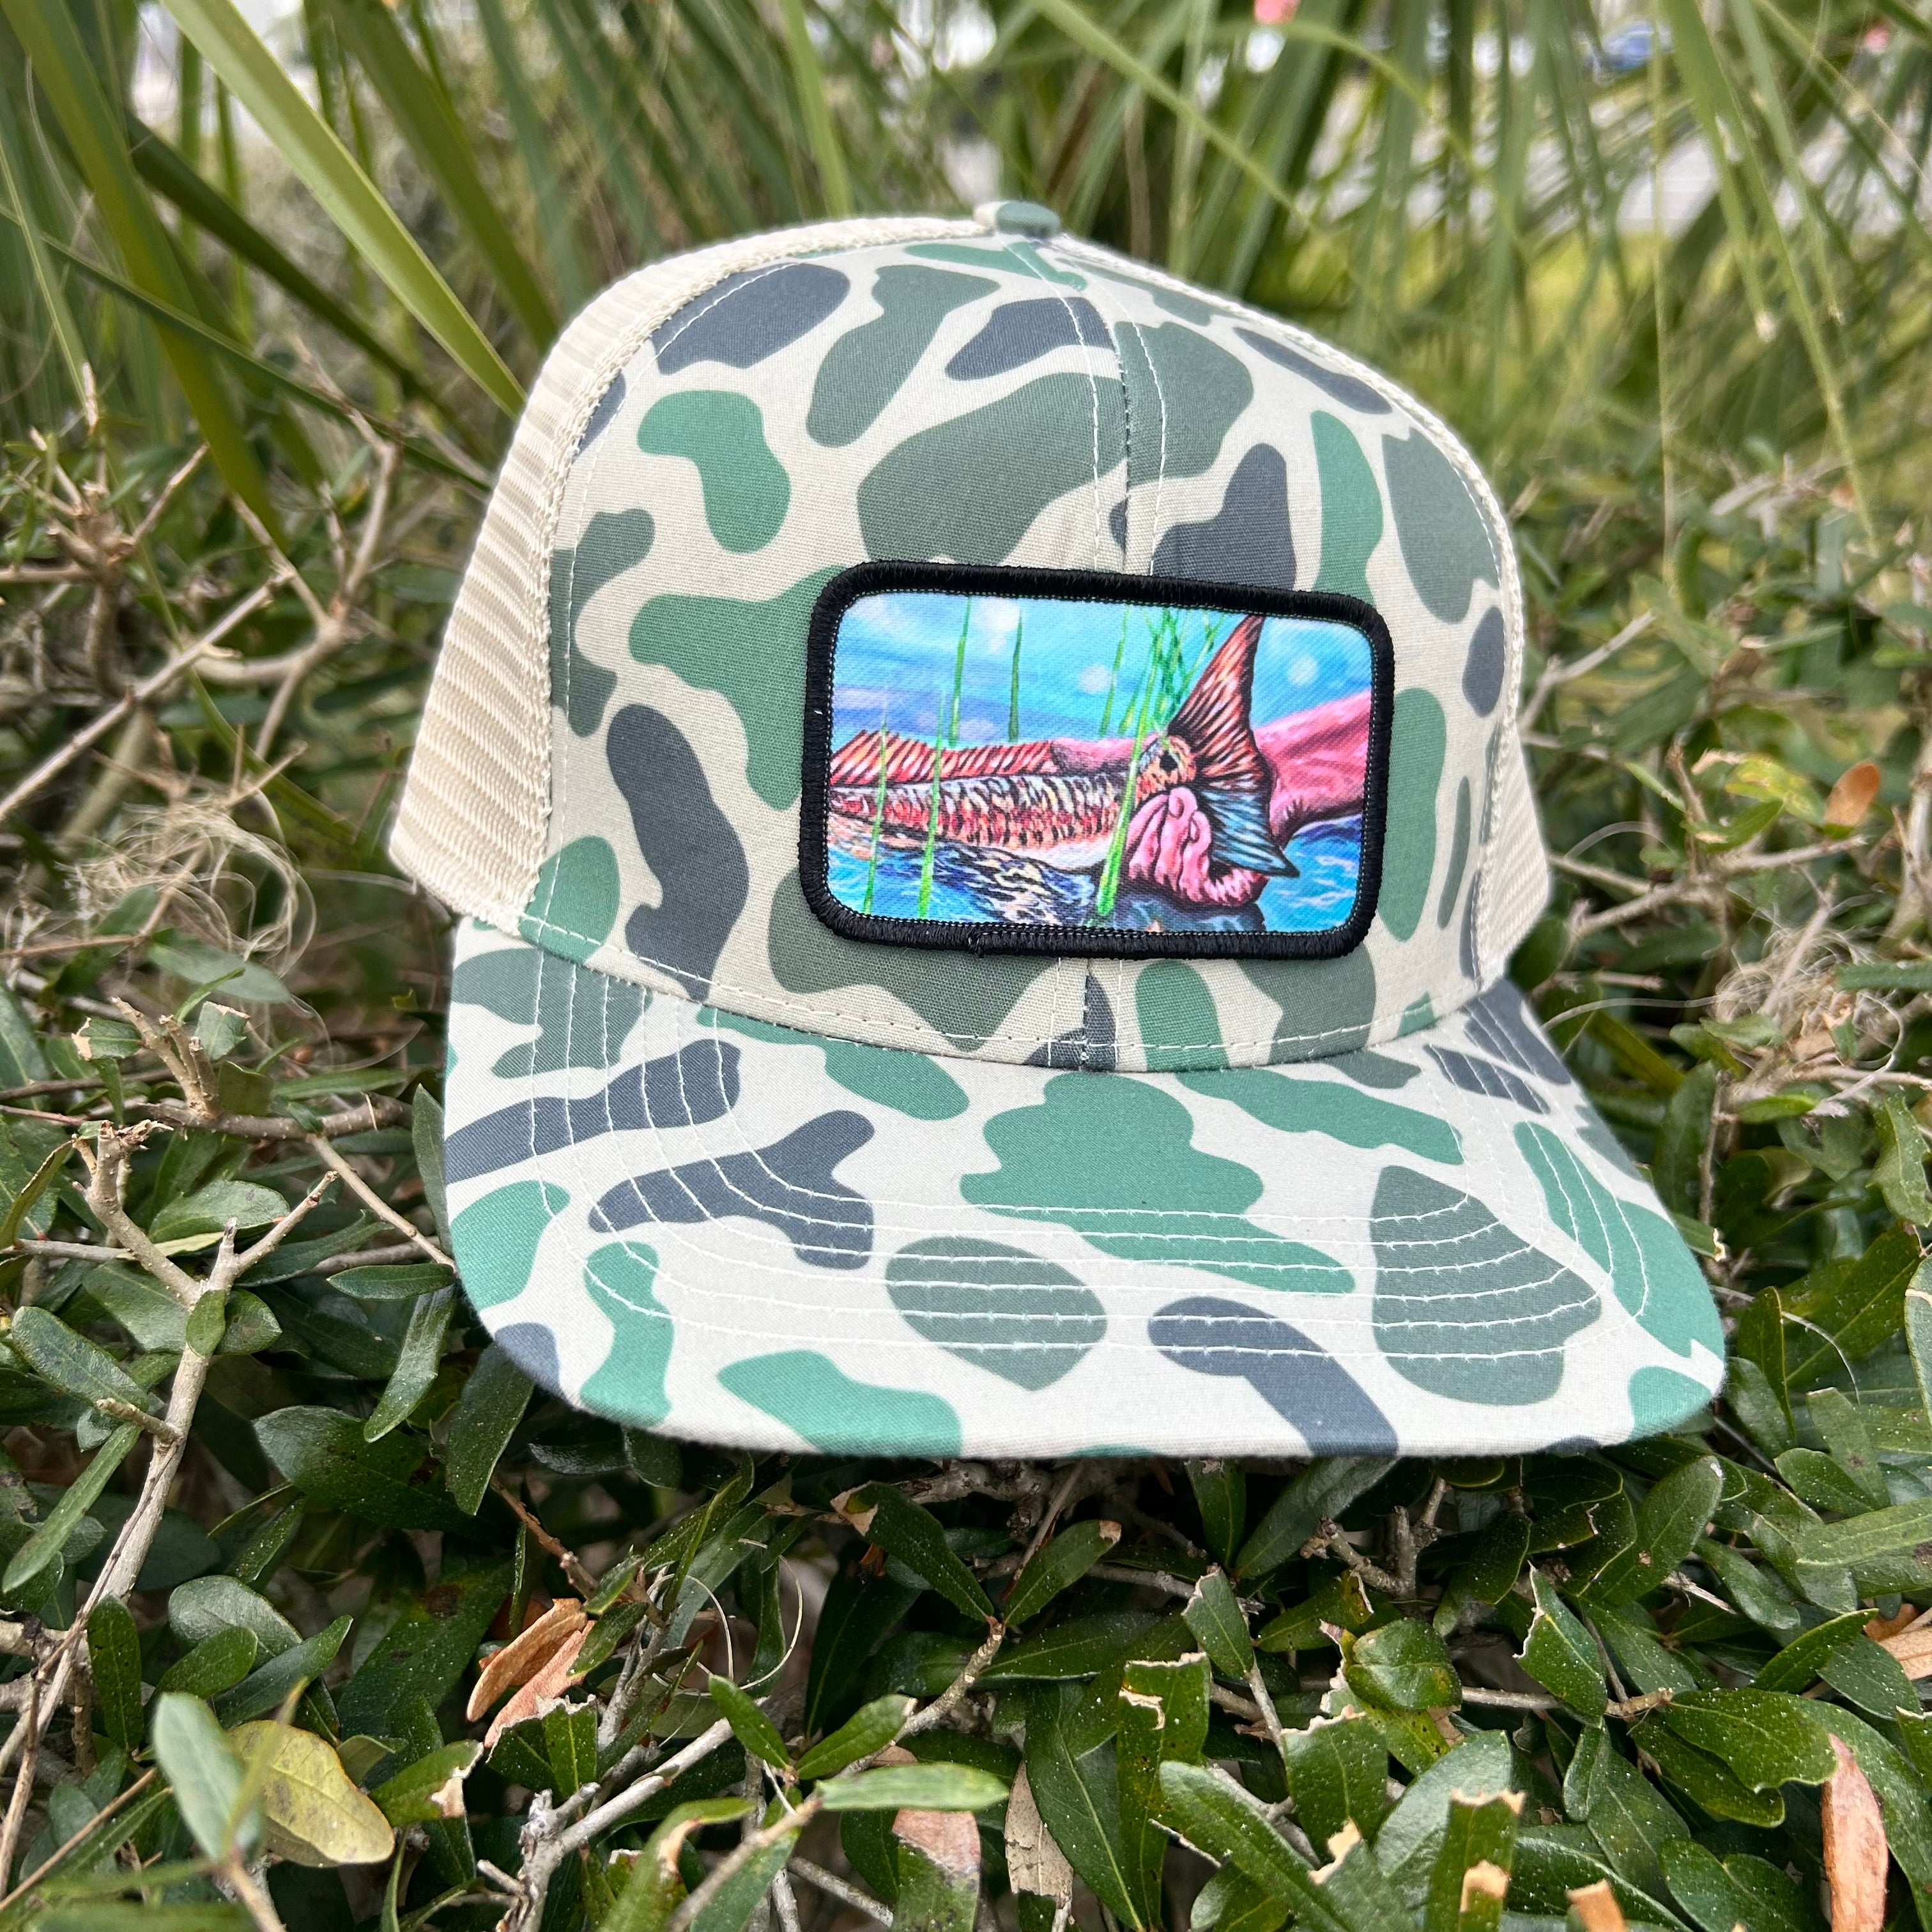 Redfish Release Patch Hat